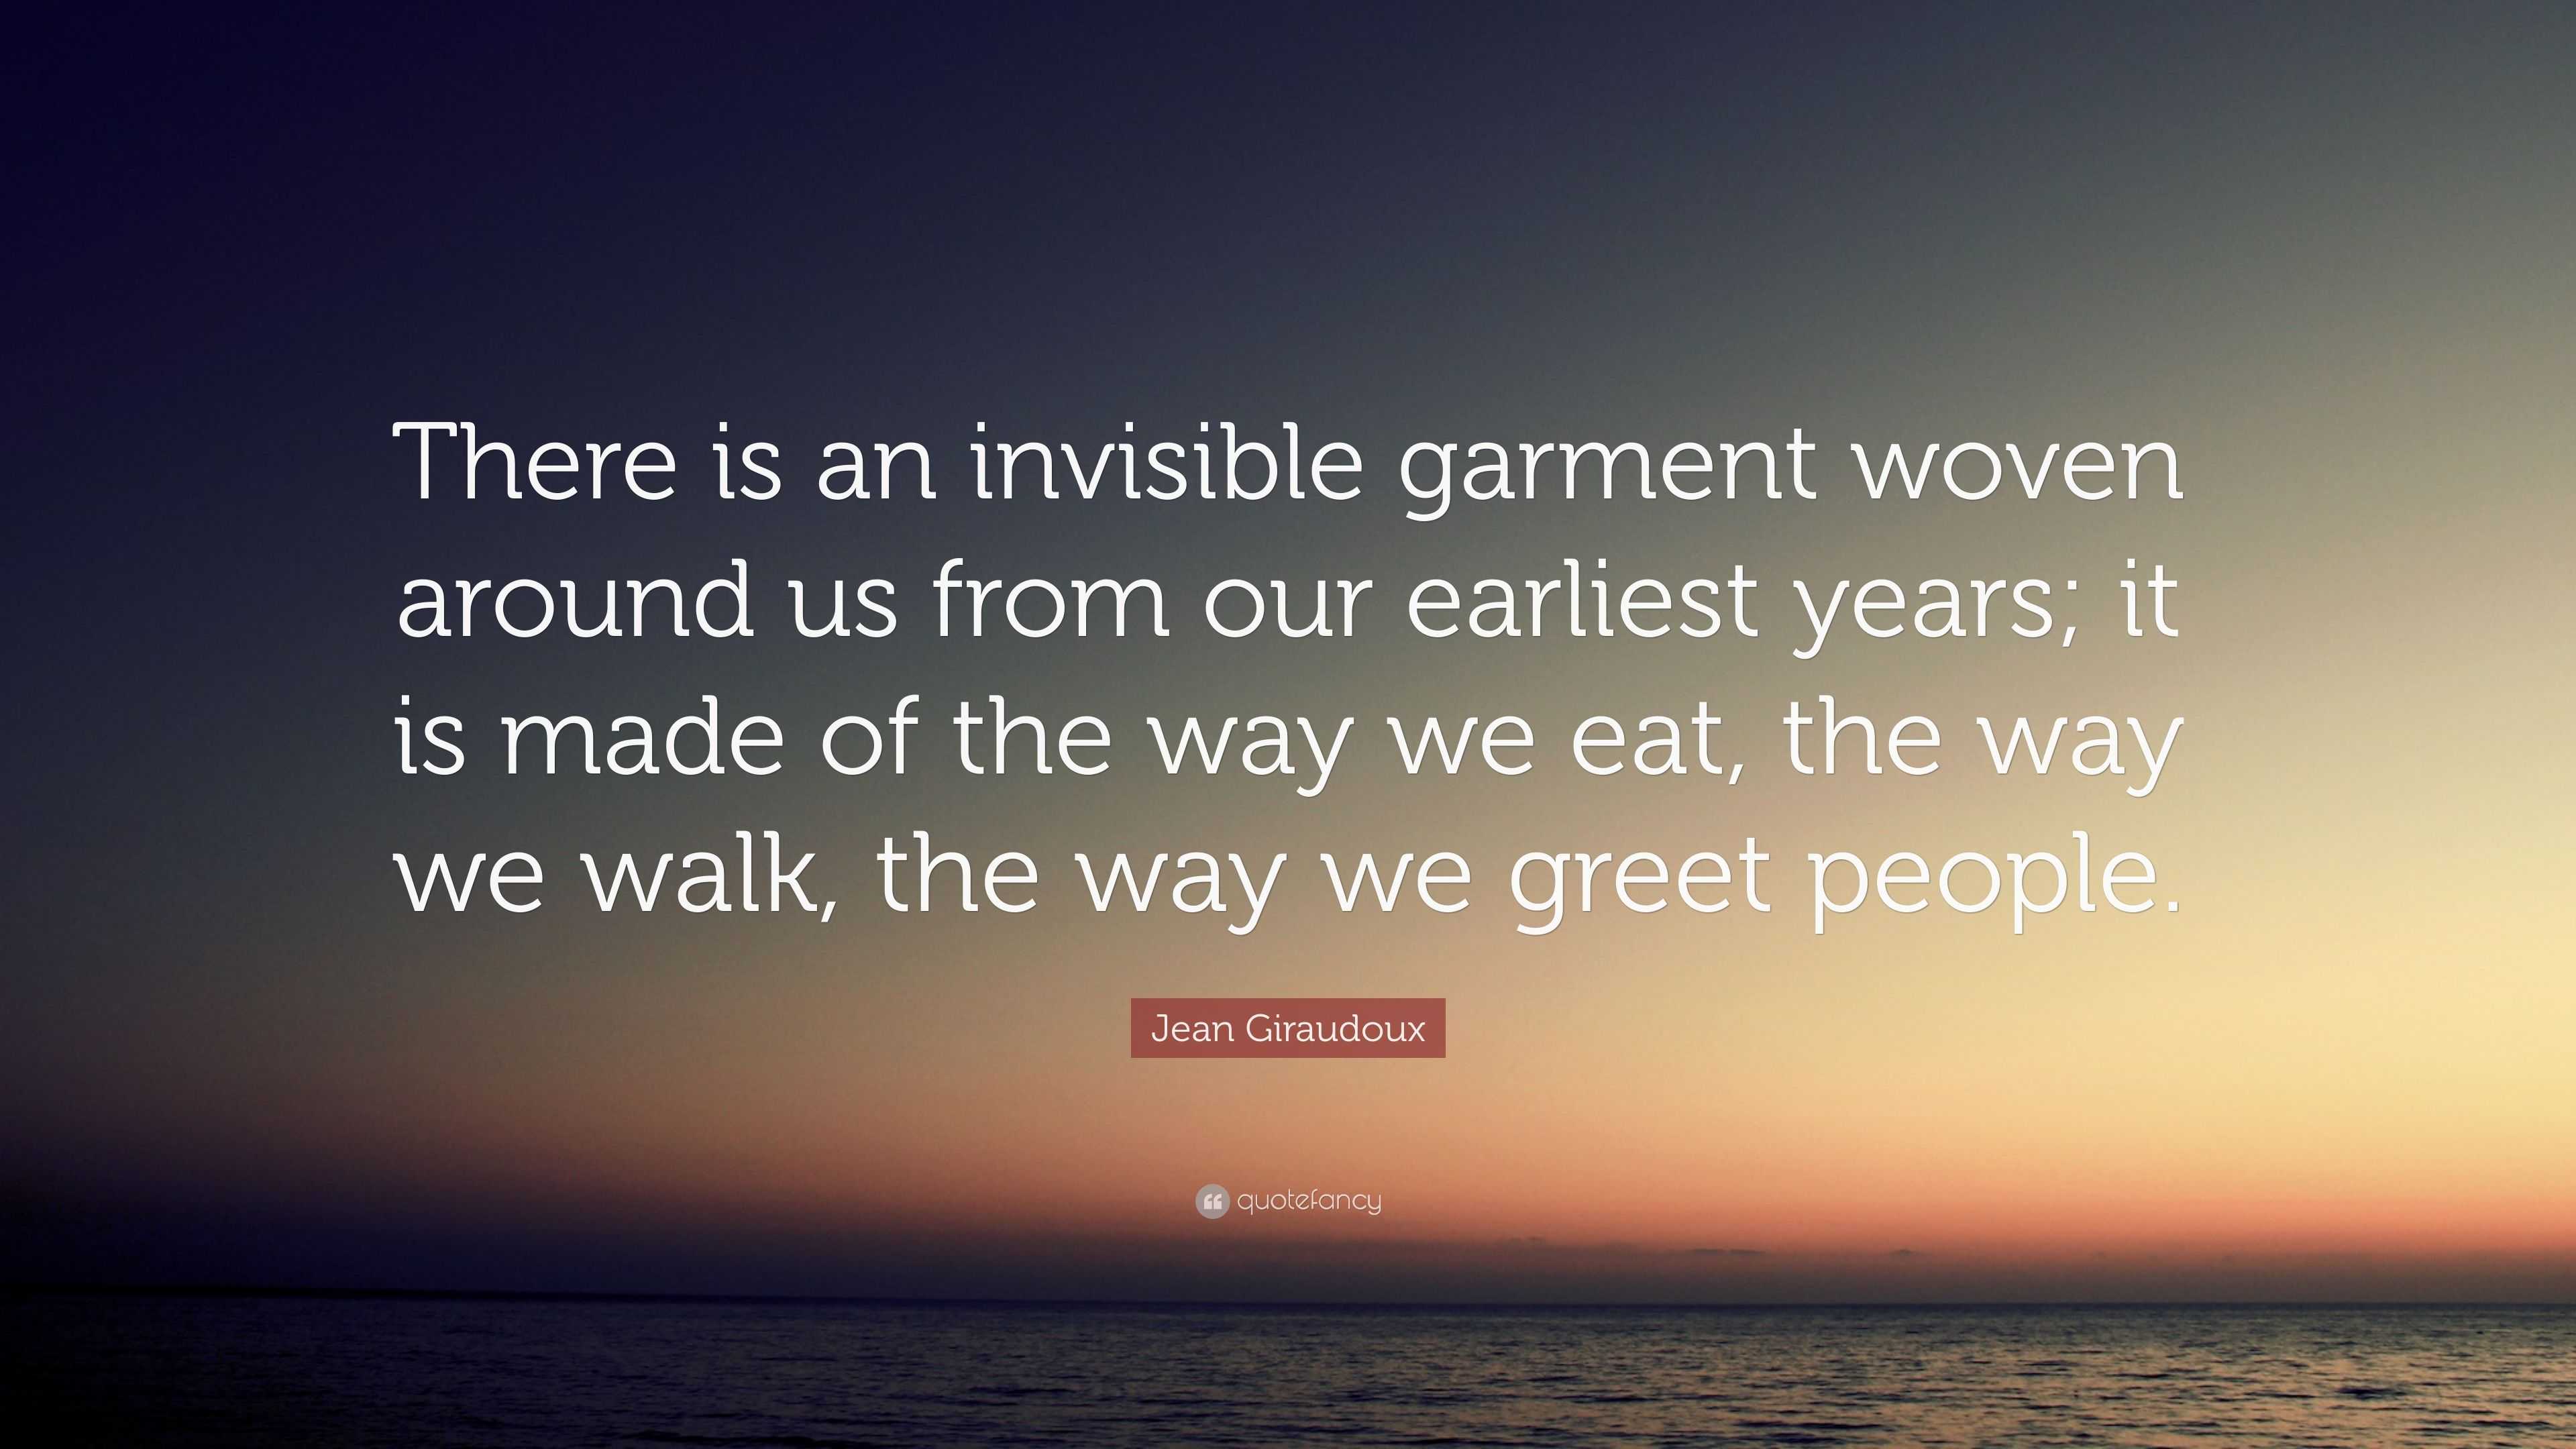 Jean Giraudoux Quote: “There is an invisible garment woven around us from  our earliest years; it is made of the way we eat, the way we walk, th”